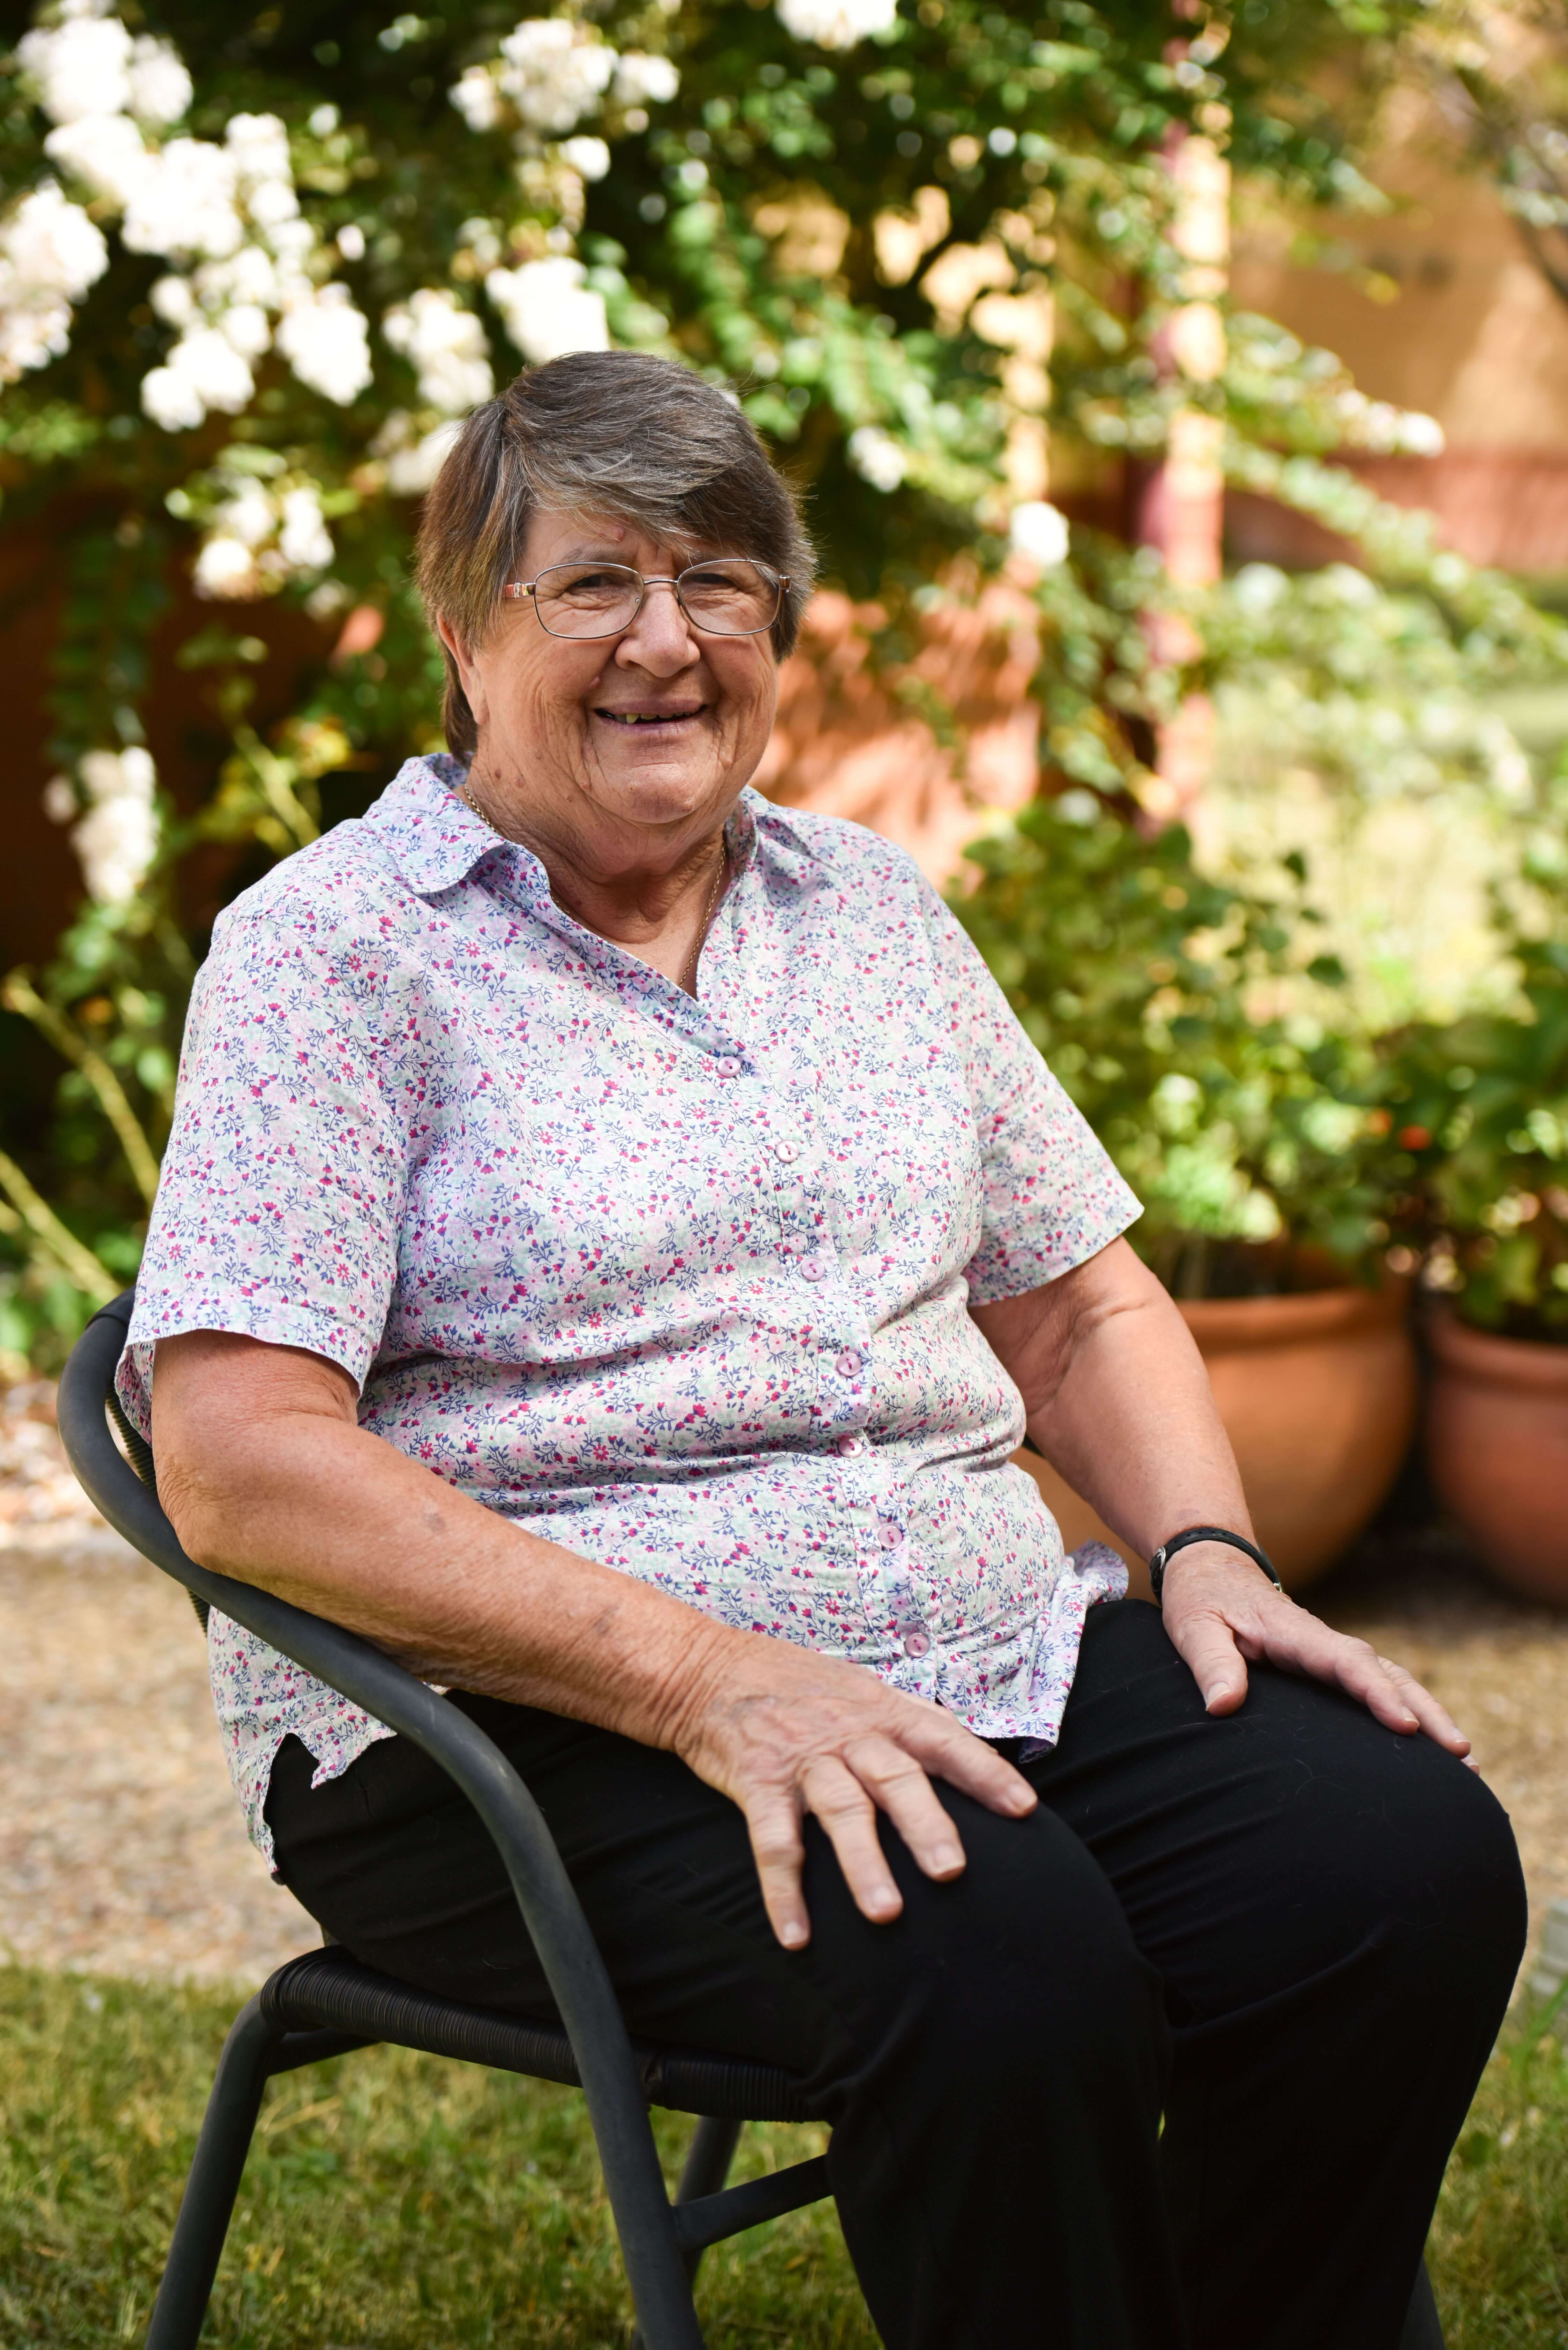 Rev-Anne-Rance_Today | RSL LifeCare - provide care and service to war veterans, retirement villages and accommodation, aged care services and assisted living